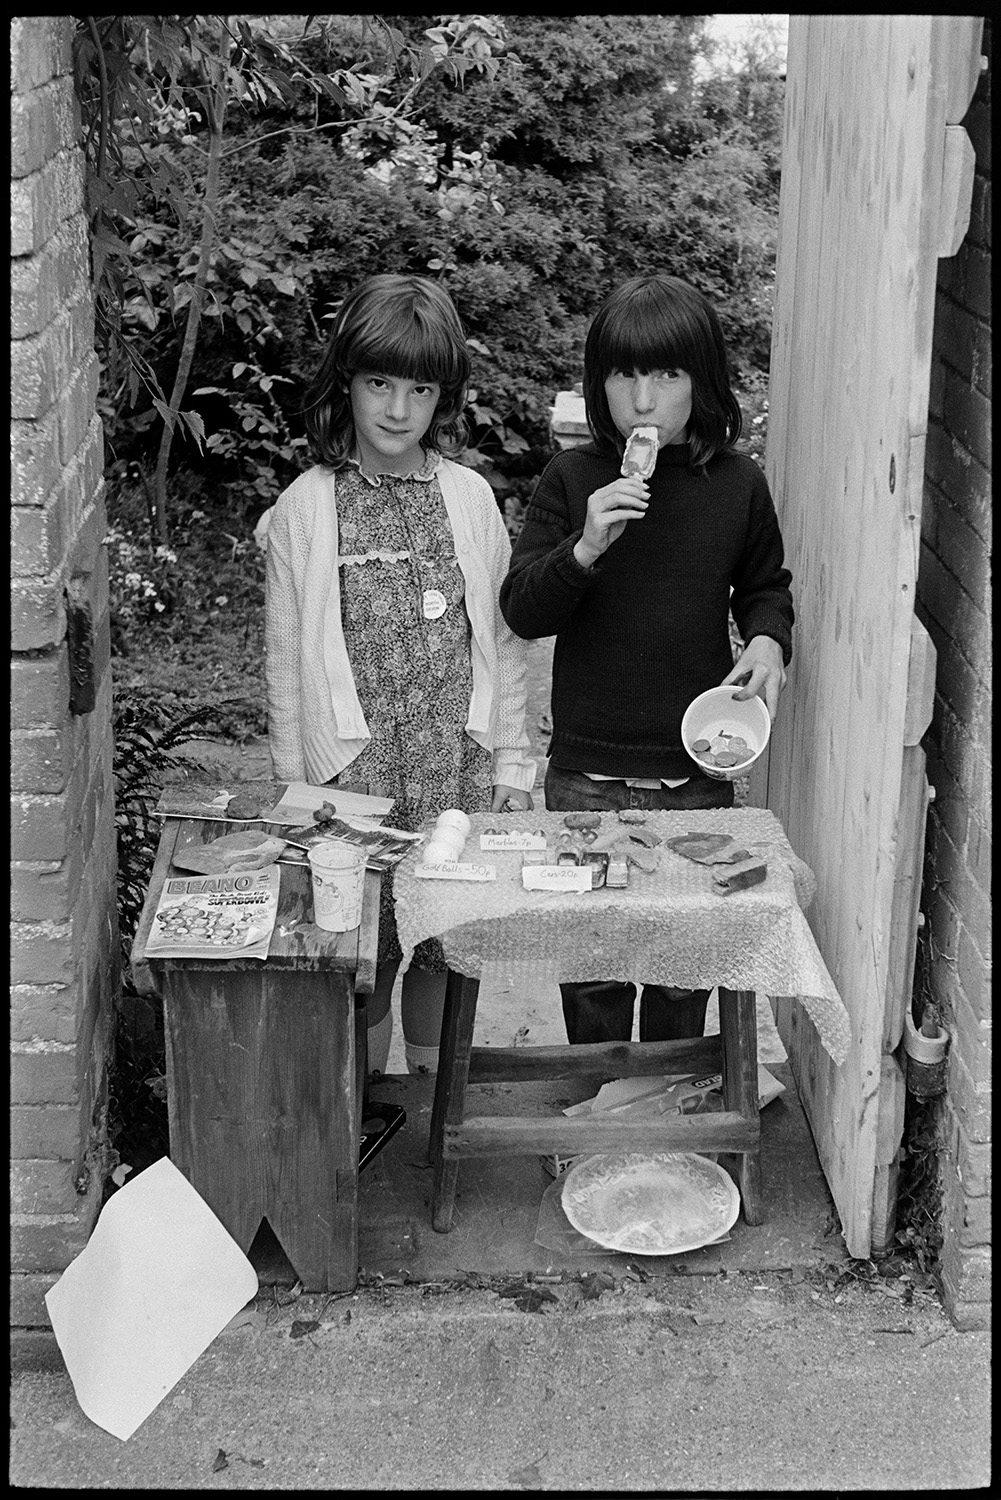 Children's stall on market day of fair.
[Ella Ravilious and Camilla Robinson running a stall by a gate at North Walk, Chulmleigh, on the market day at Chulmleigh Fair. They are selling golf balls, cars and marbles. Photographs and a Beano magazine are also on the stall.]